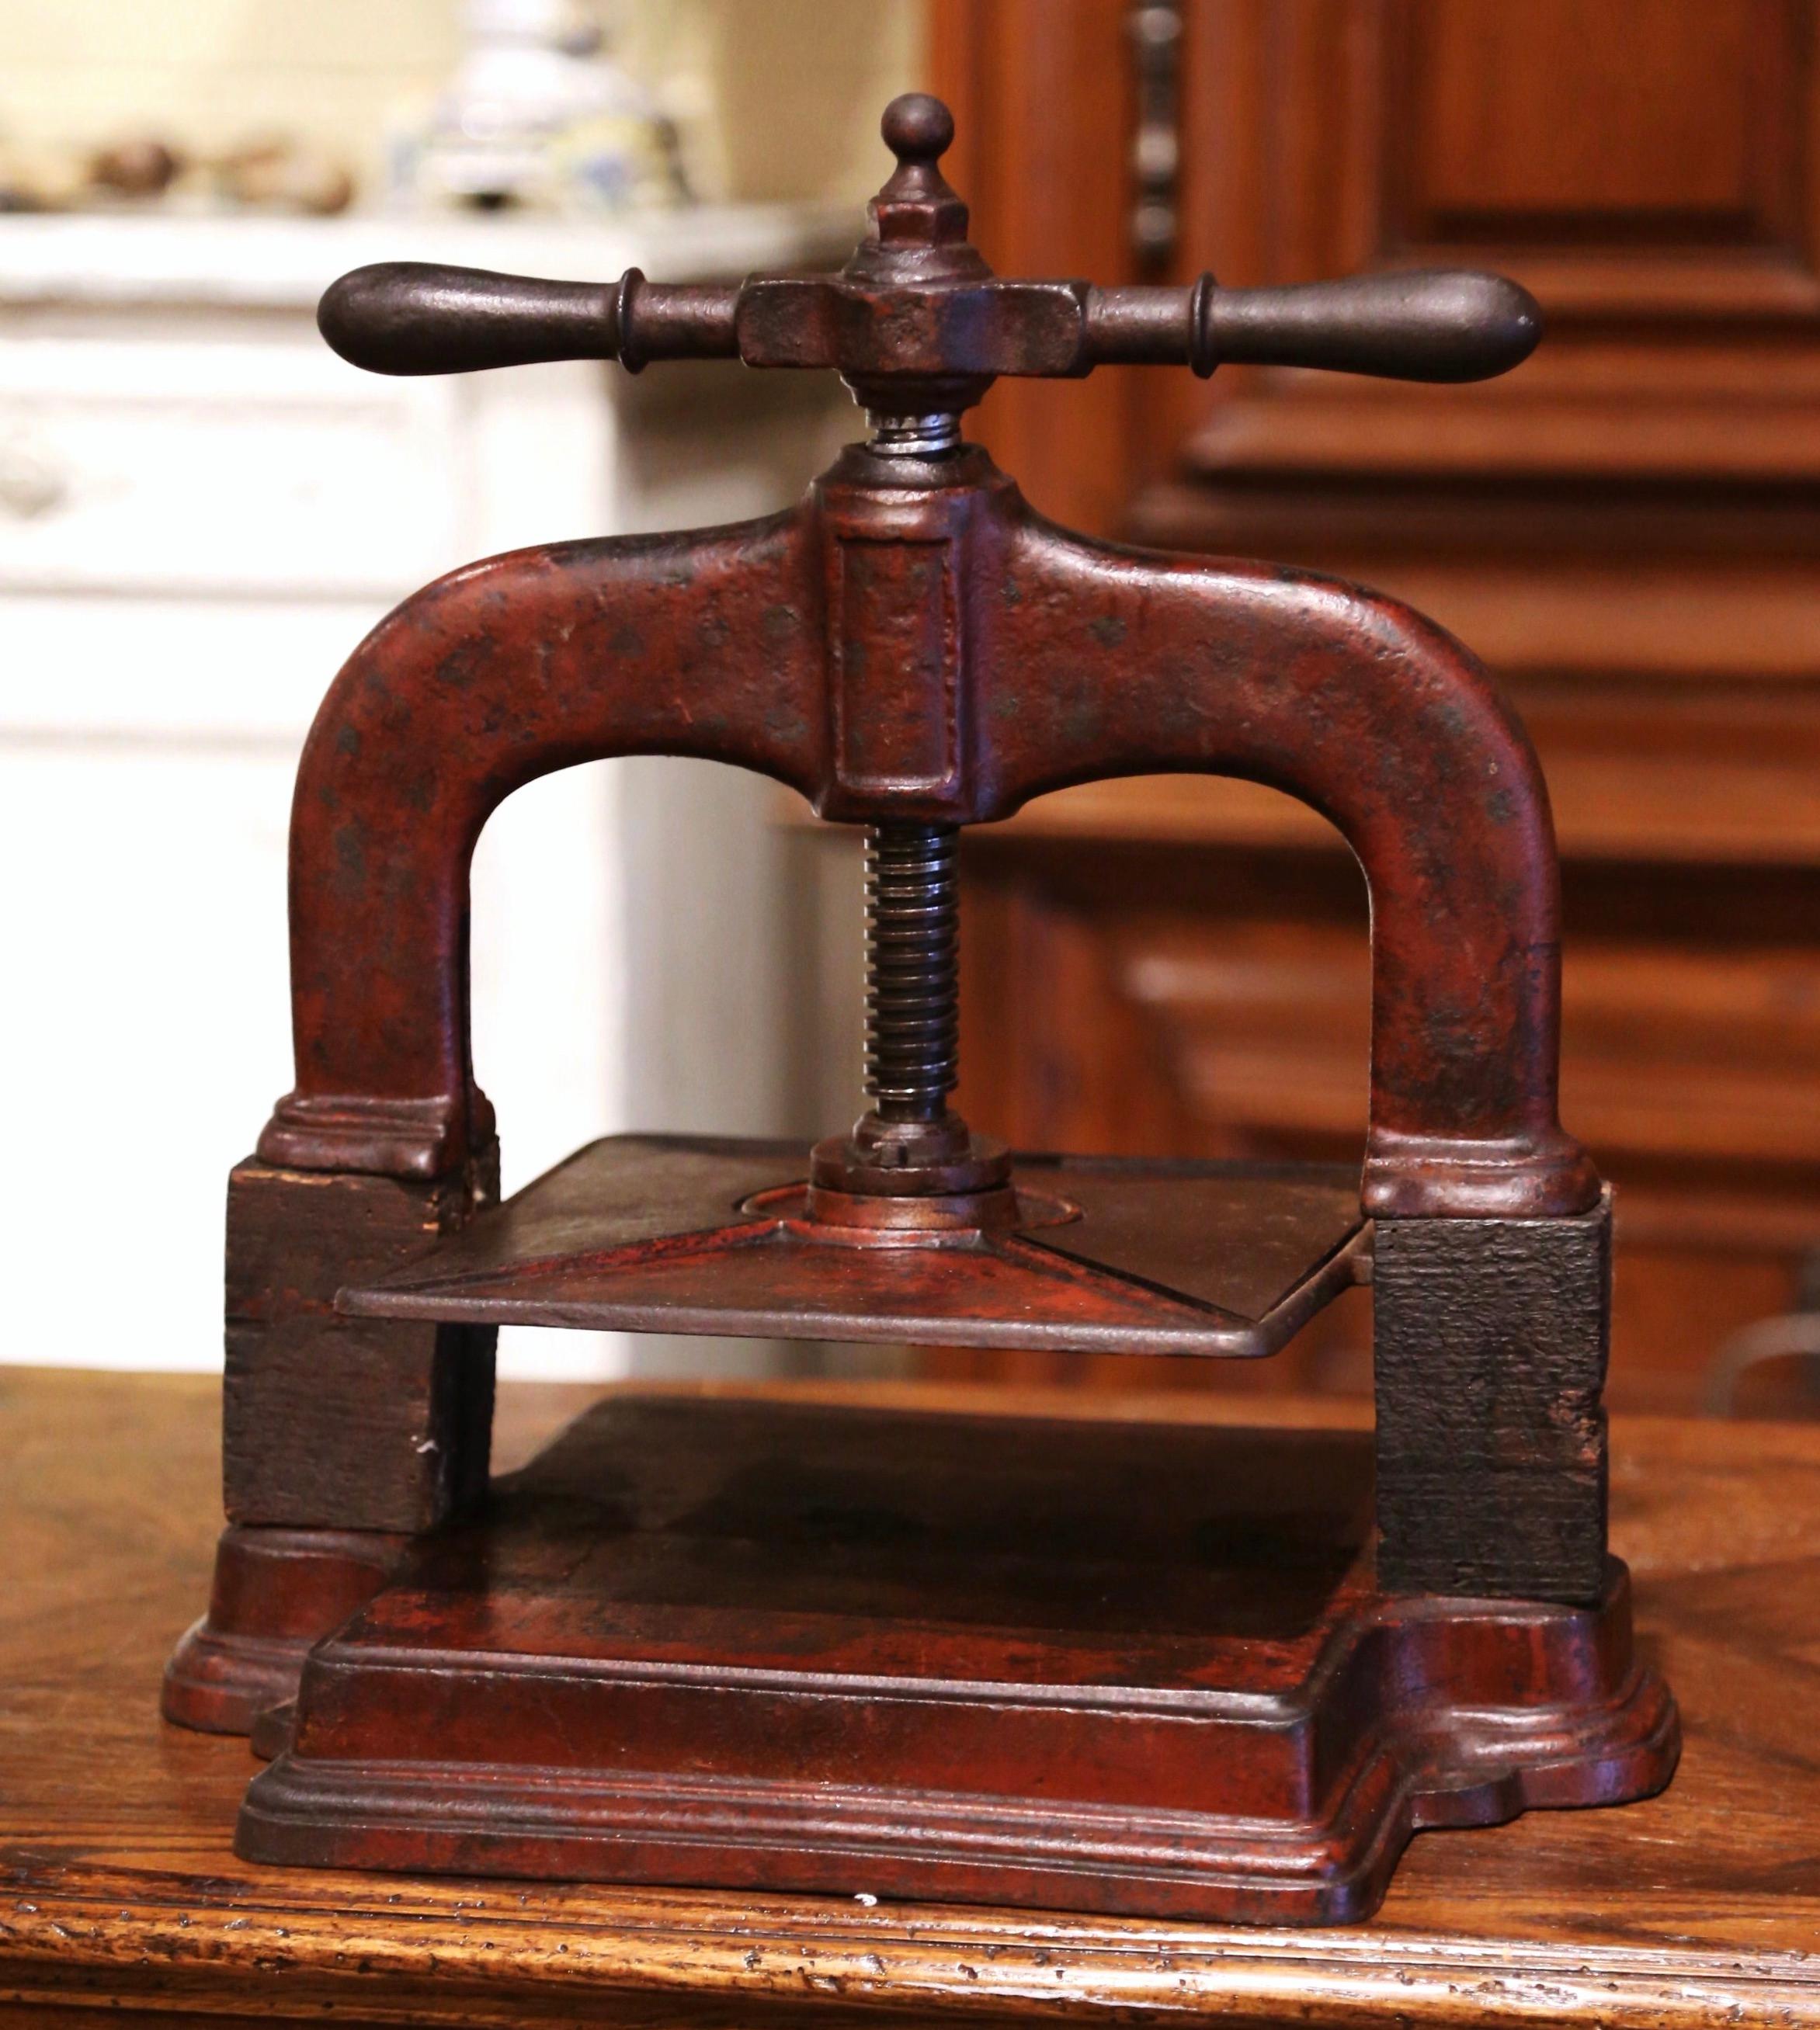 This antique paper binding press was forged in France, circa 1860. The Classic 